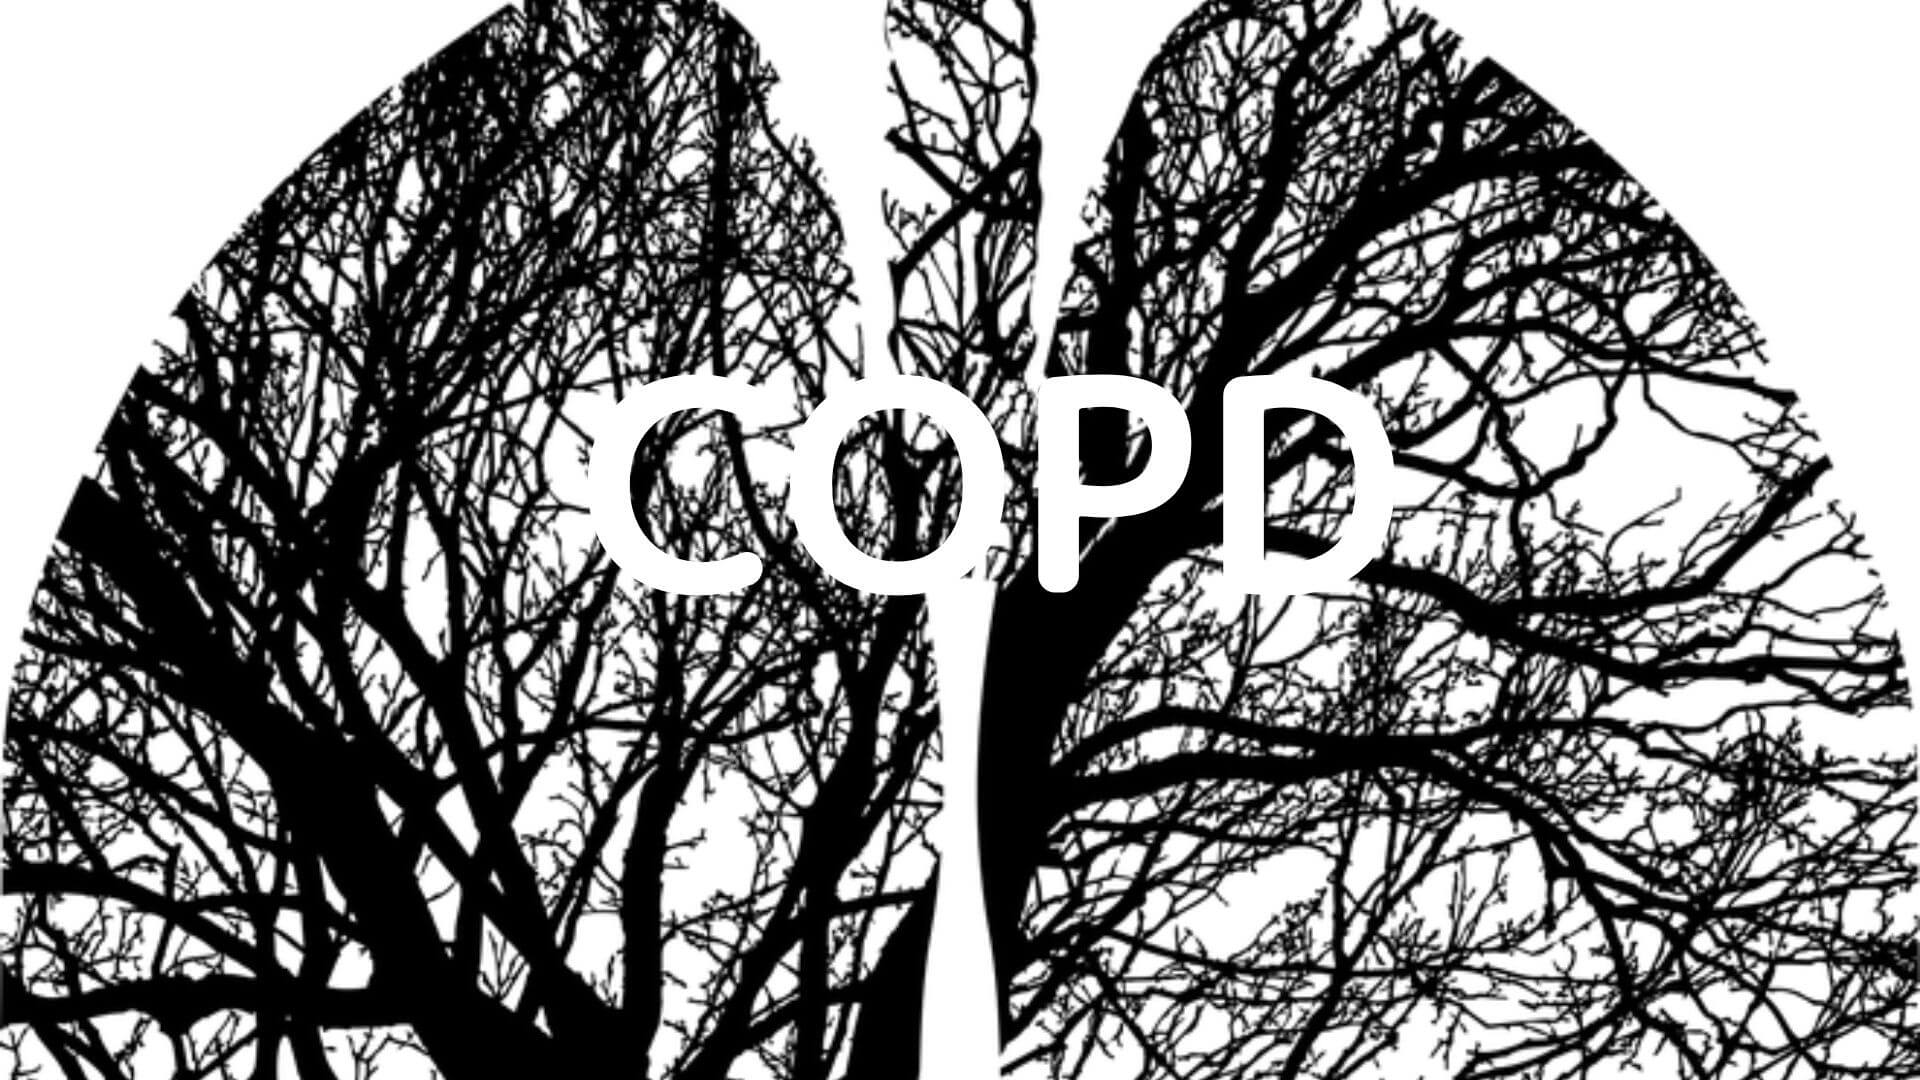 COPD